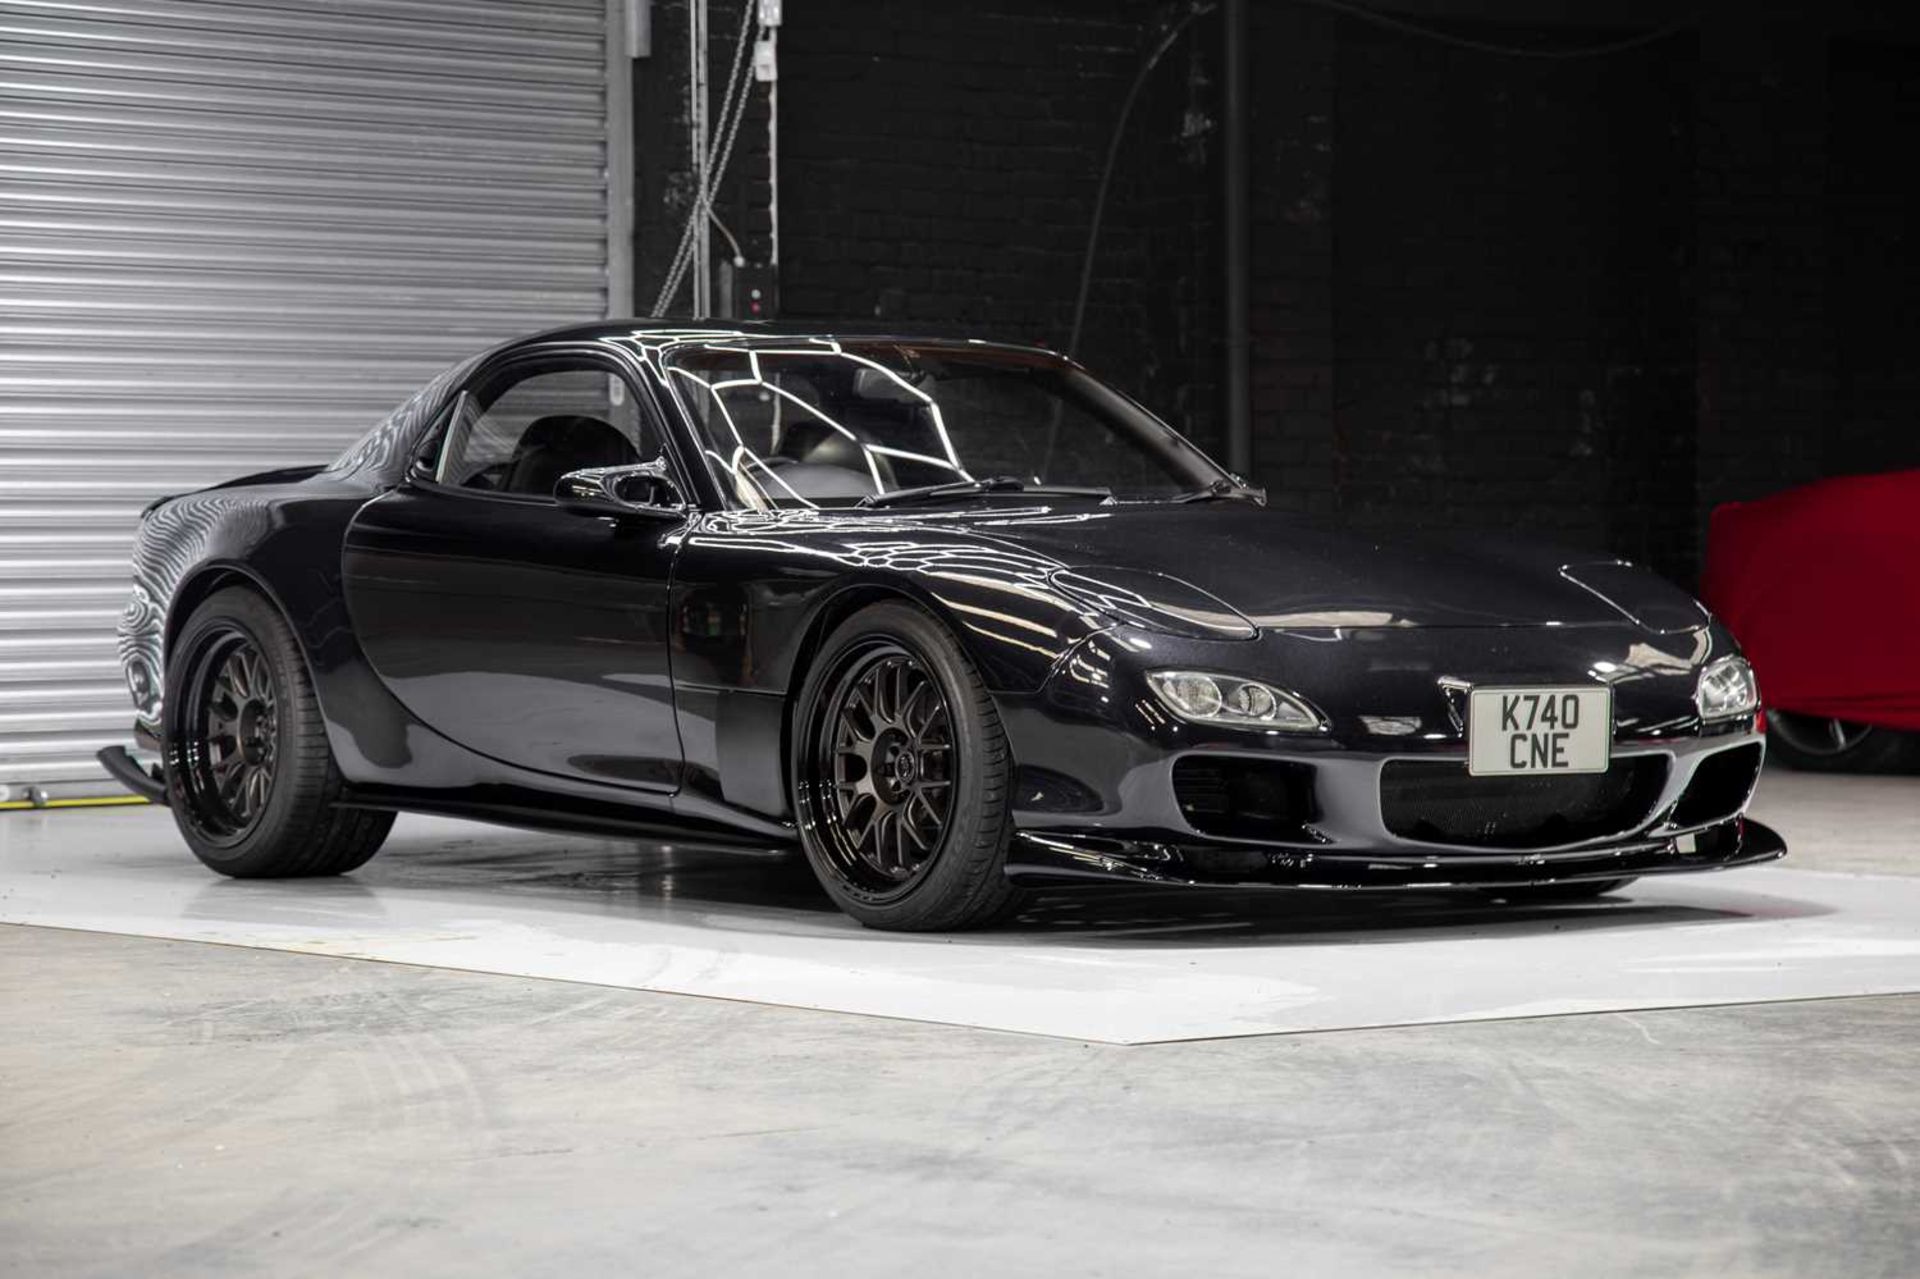 1993 Mazda RX7 FD Efini UK registered since 2003 and the subject of a major restoration and upgrade  - Image 2 of 108